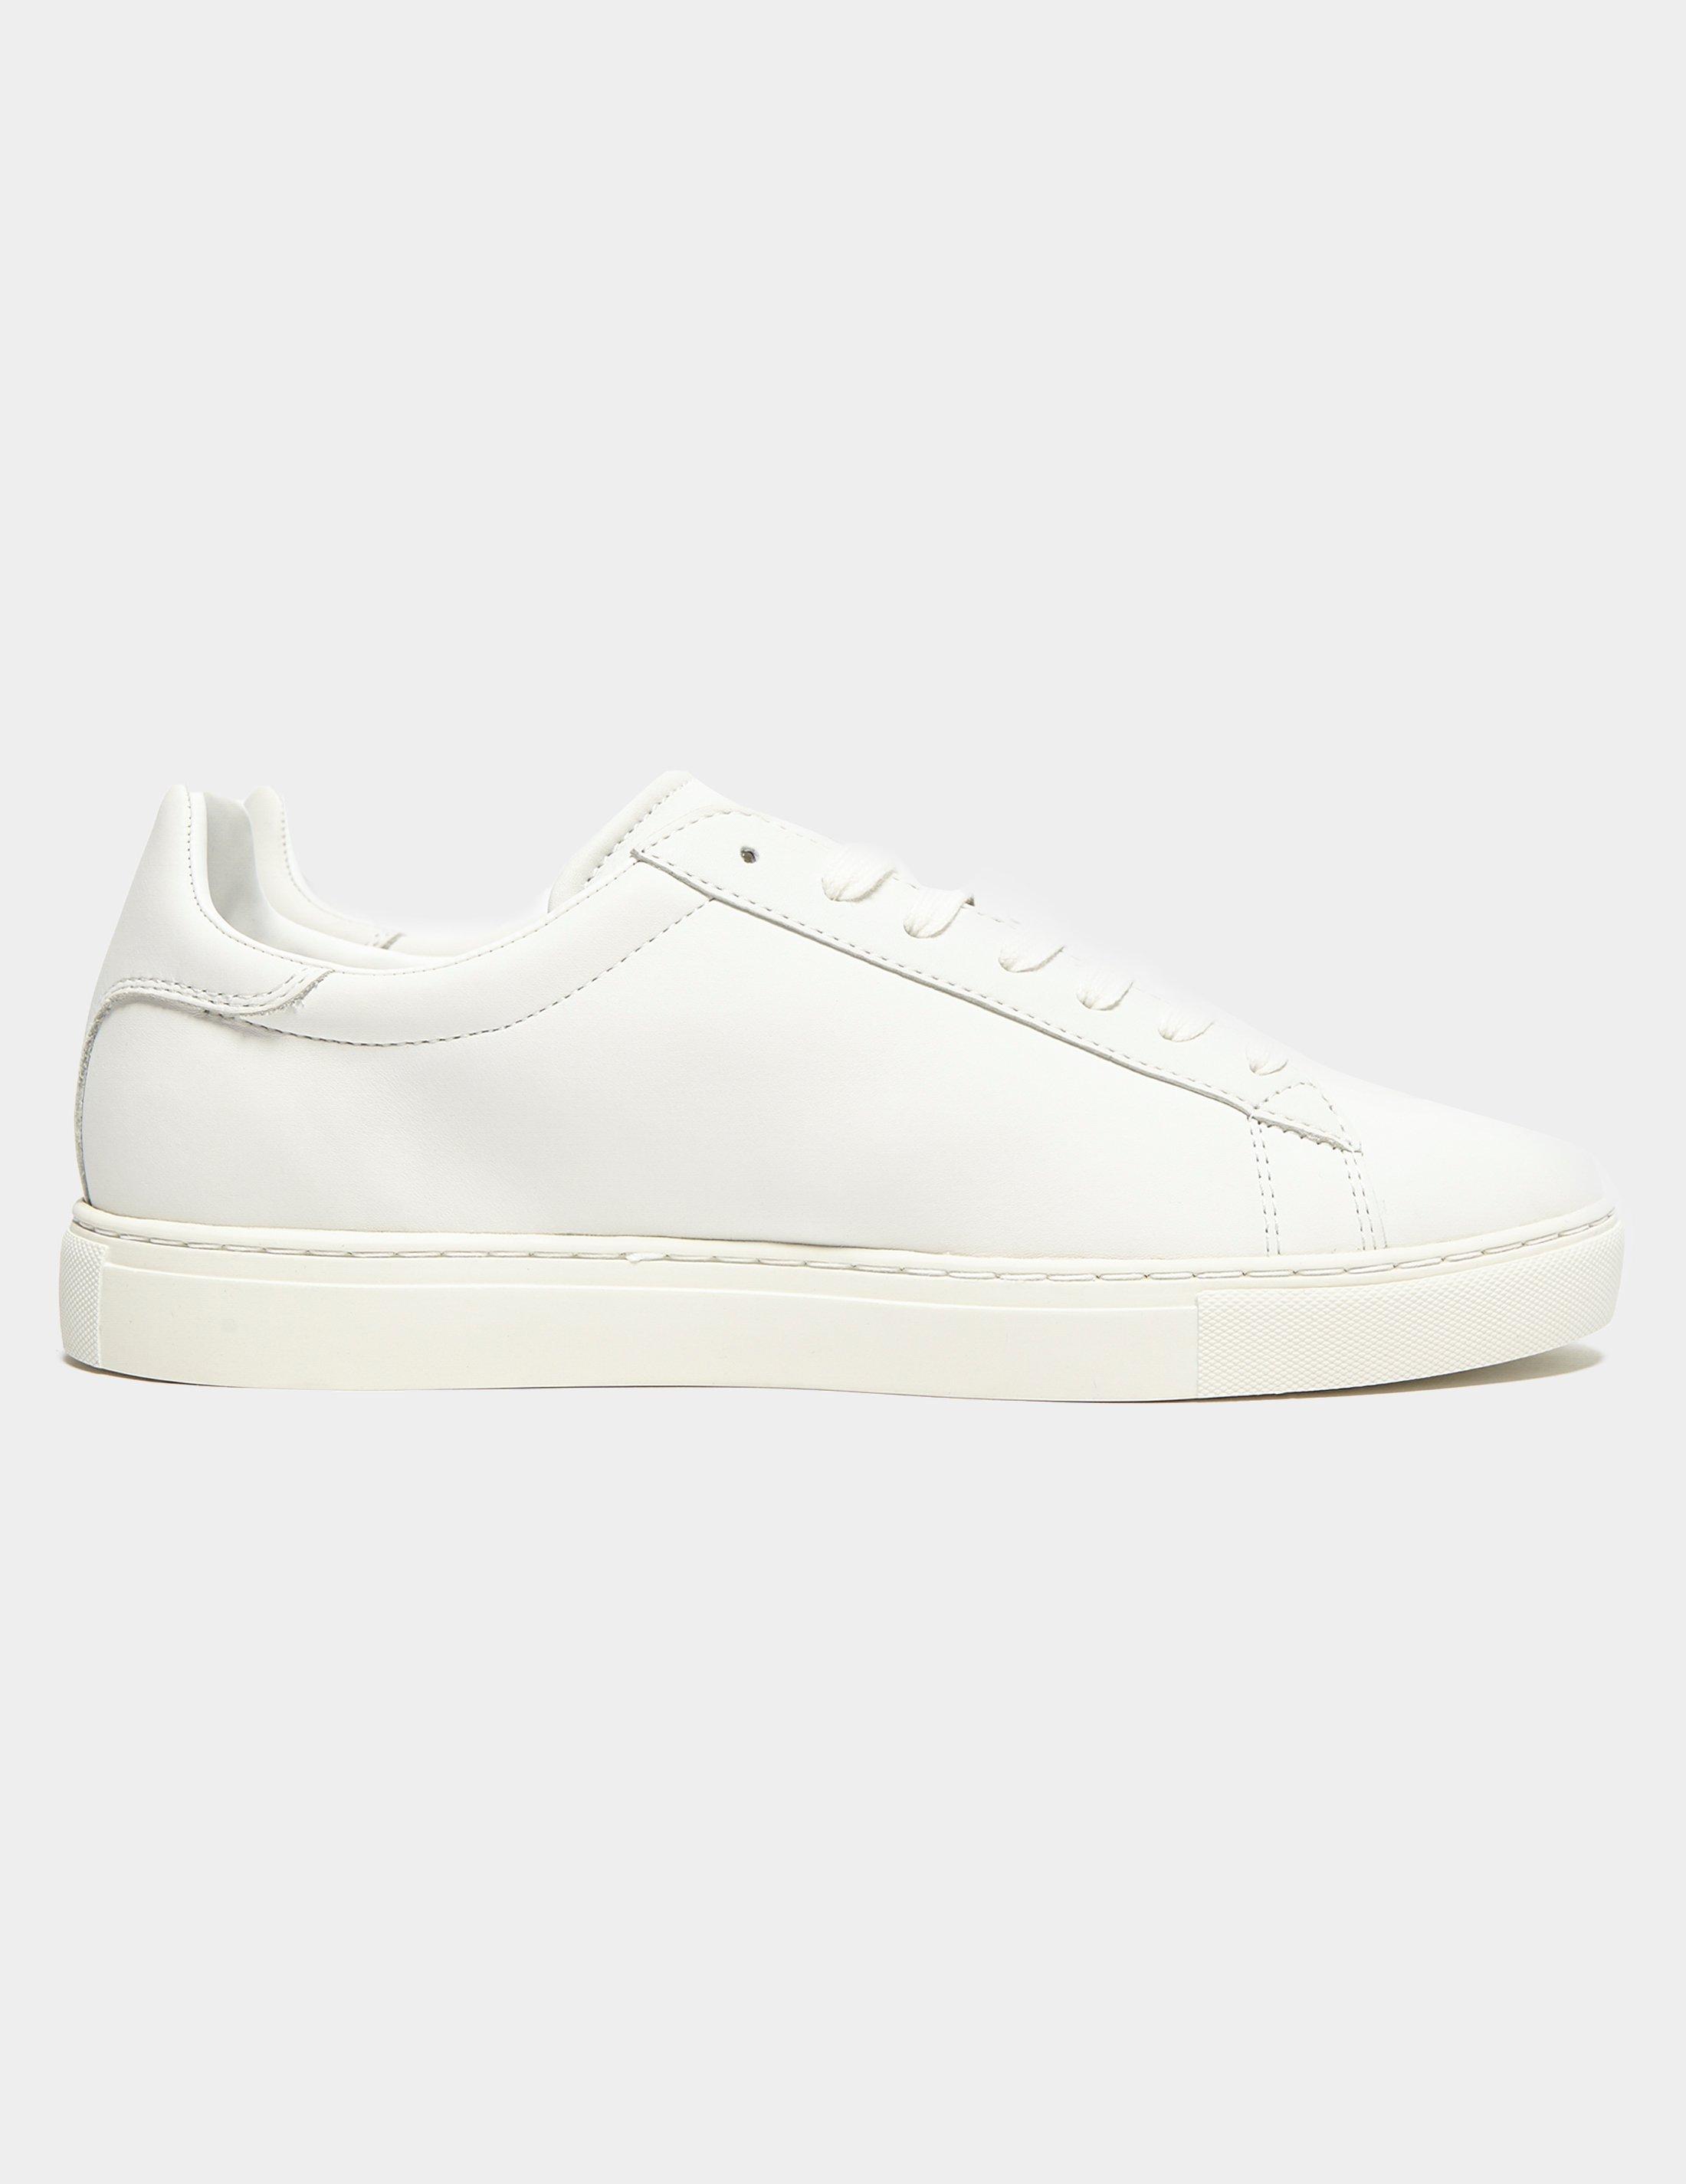 Armani Exchange Tennis Shoes White in White for Men - Save 1% - Lyst